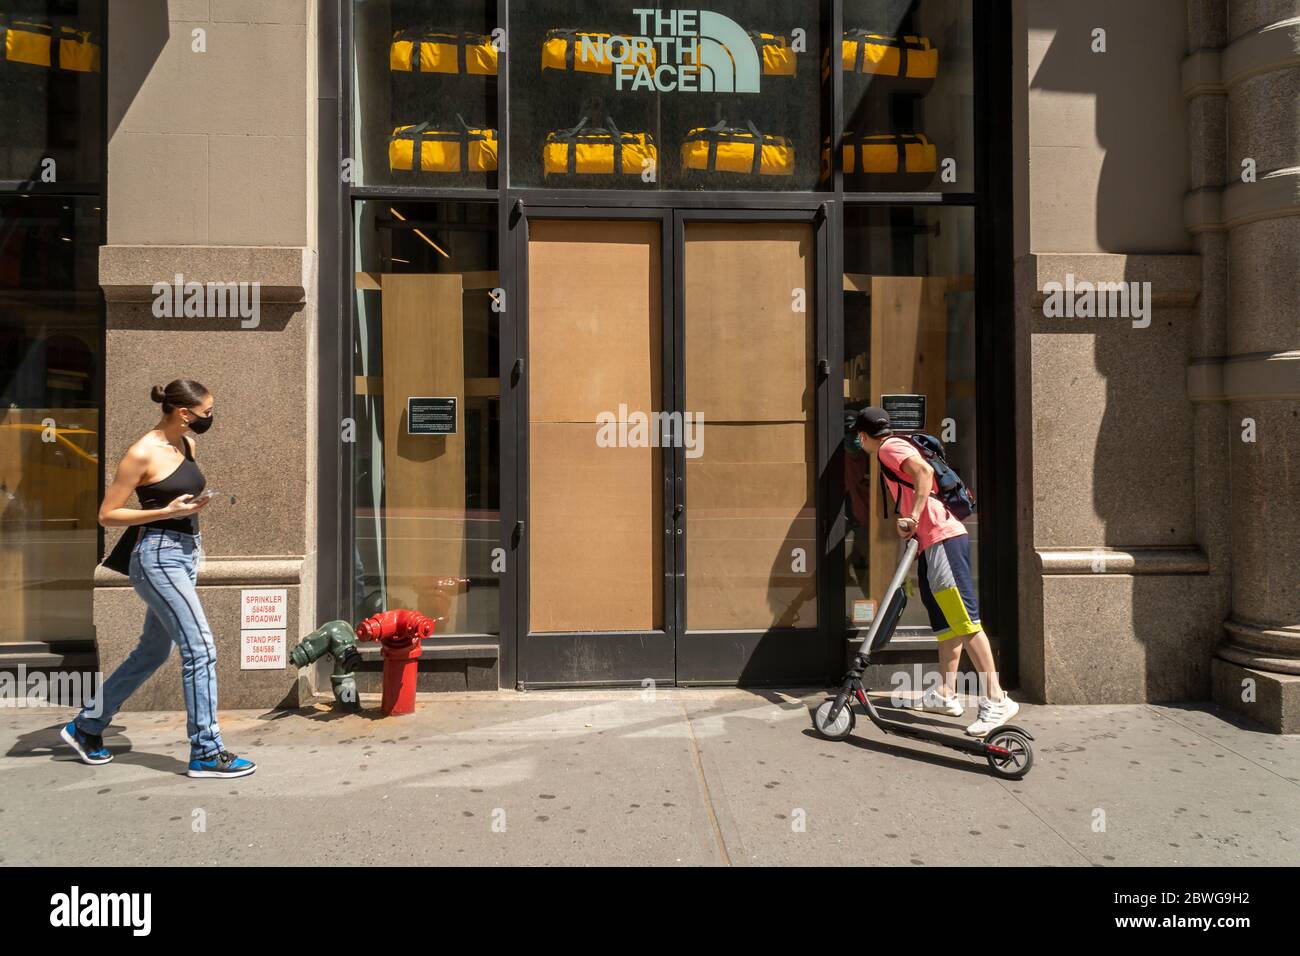 Vandalized North Face store in Soho in New York is boarded up after  vandalization and looting during the previous night's protests related to  the death of George Floyd, seen on Sunday, May